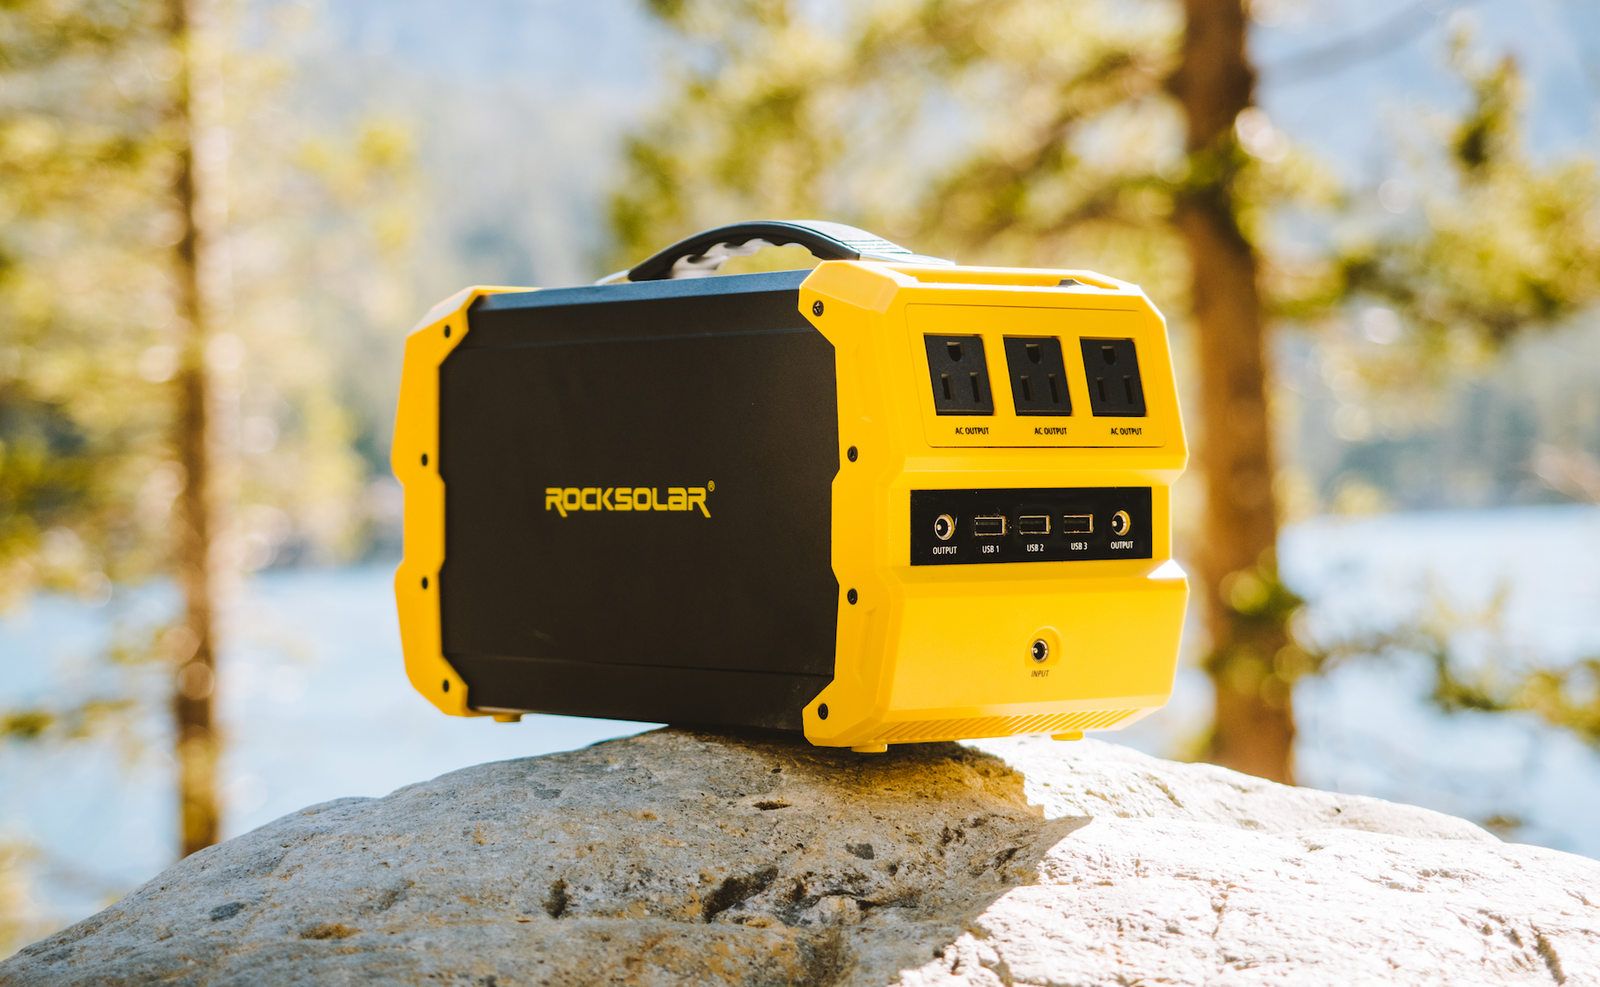 Stick with Your New Years Resolution with The Future of Traveling from ROCKSOLAR